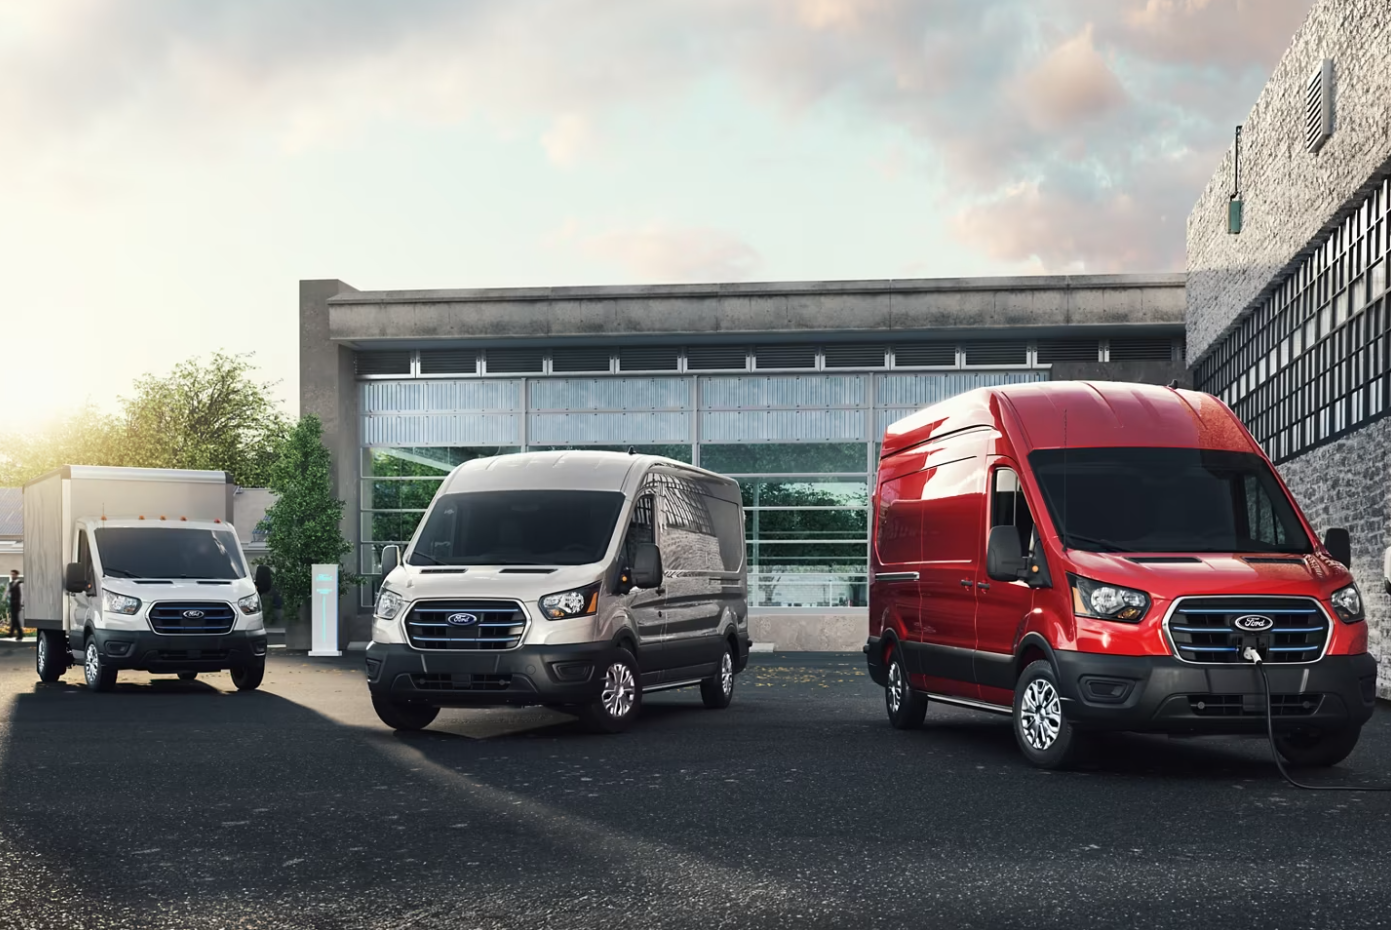 Three 2023 Ford E-Series Vans parked in front of a commercial building